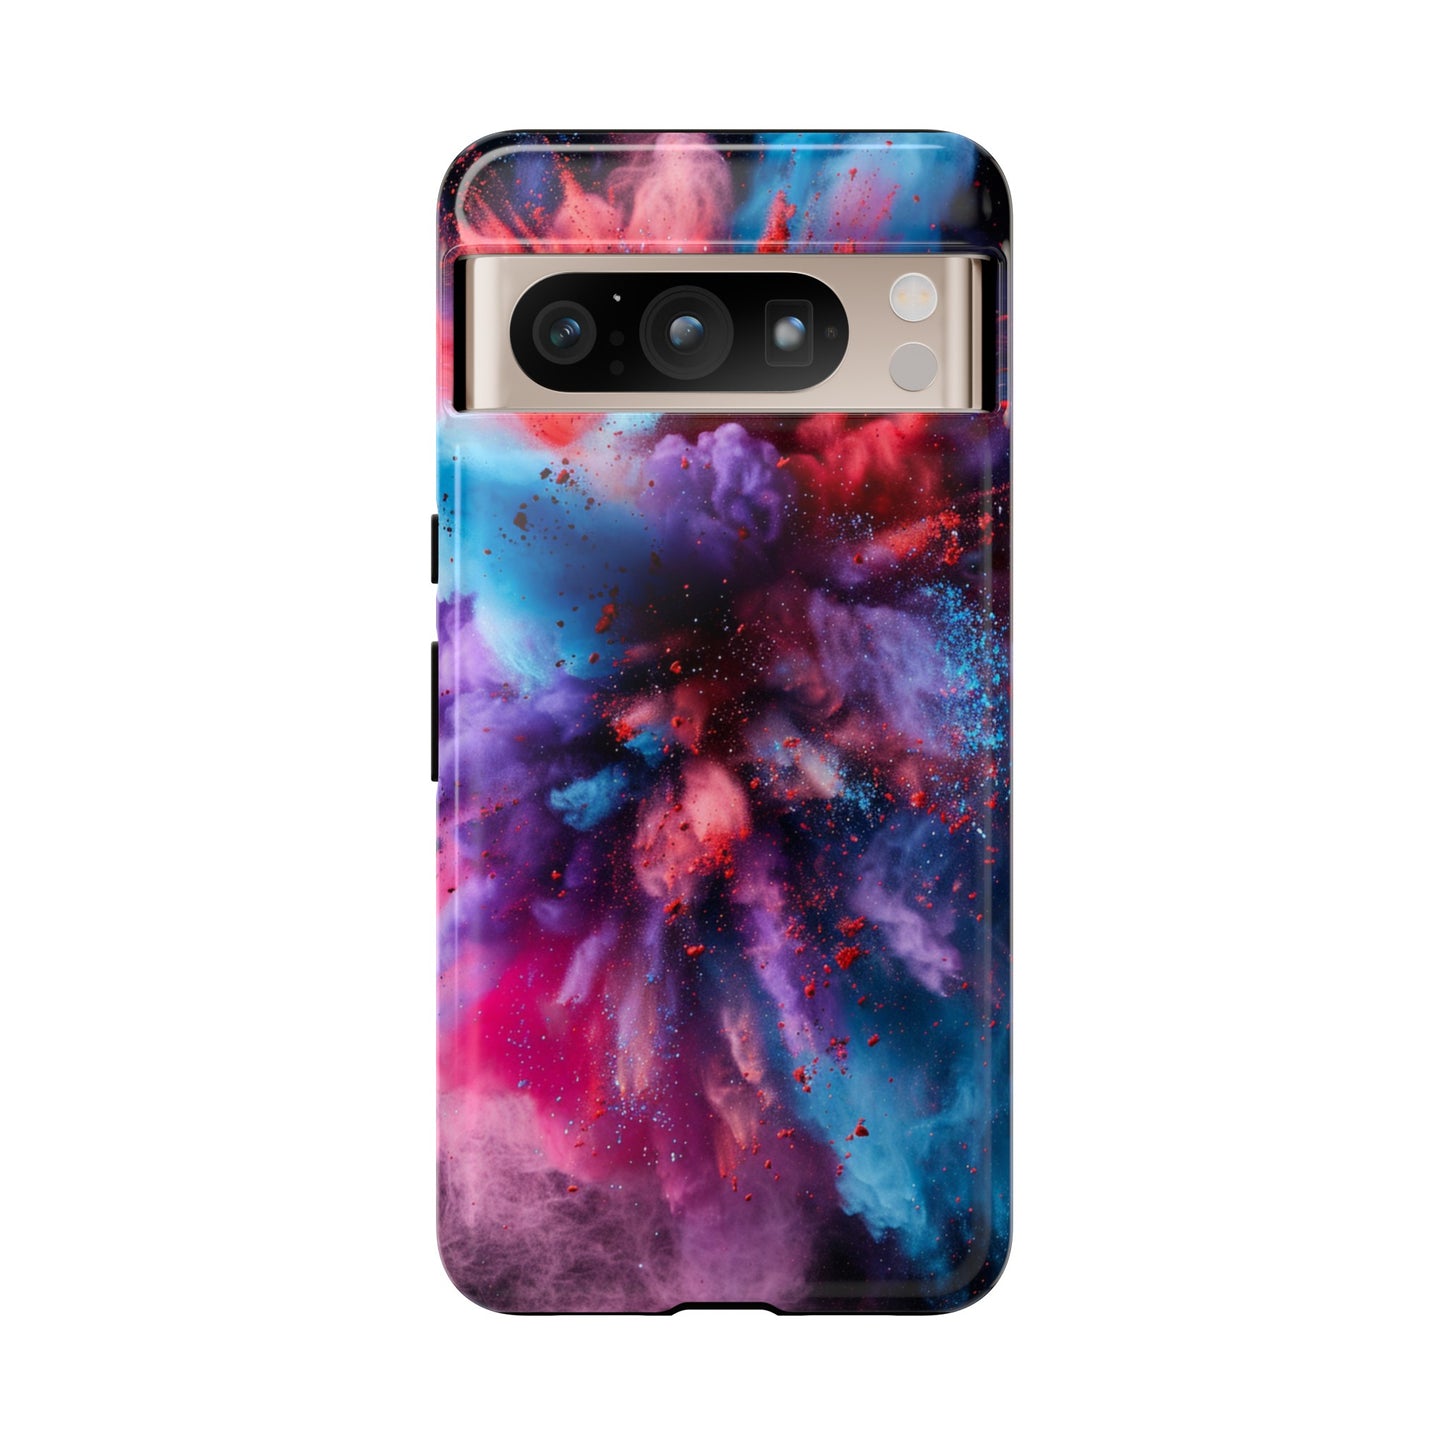 Universe inspired phone case for Google Pixel